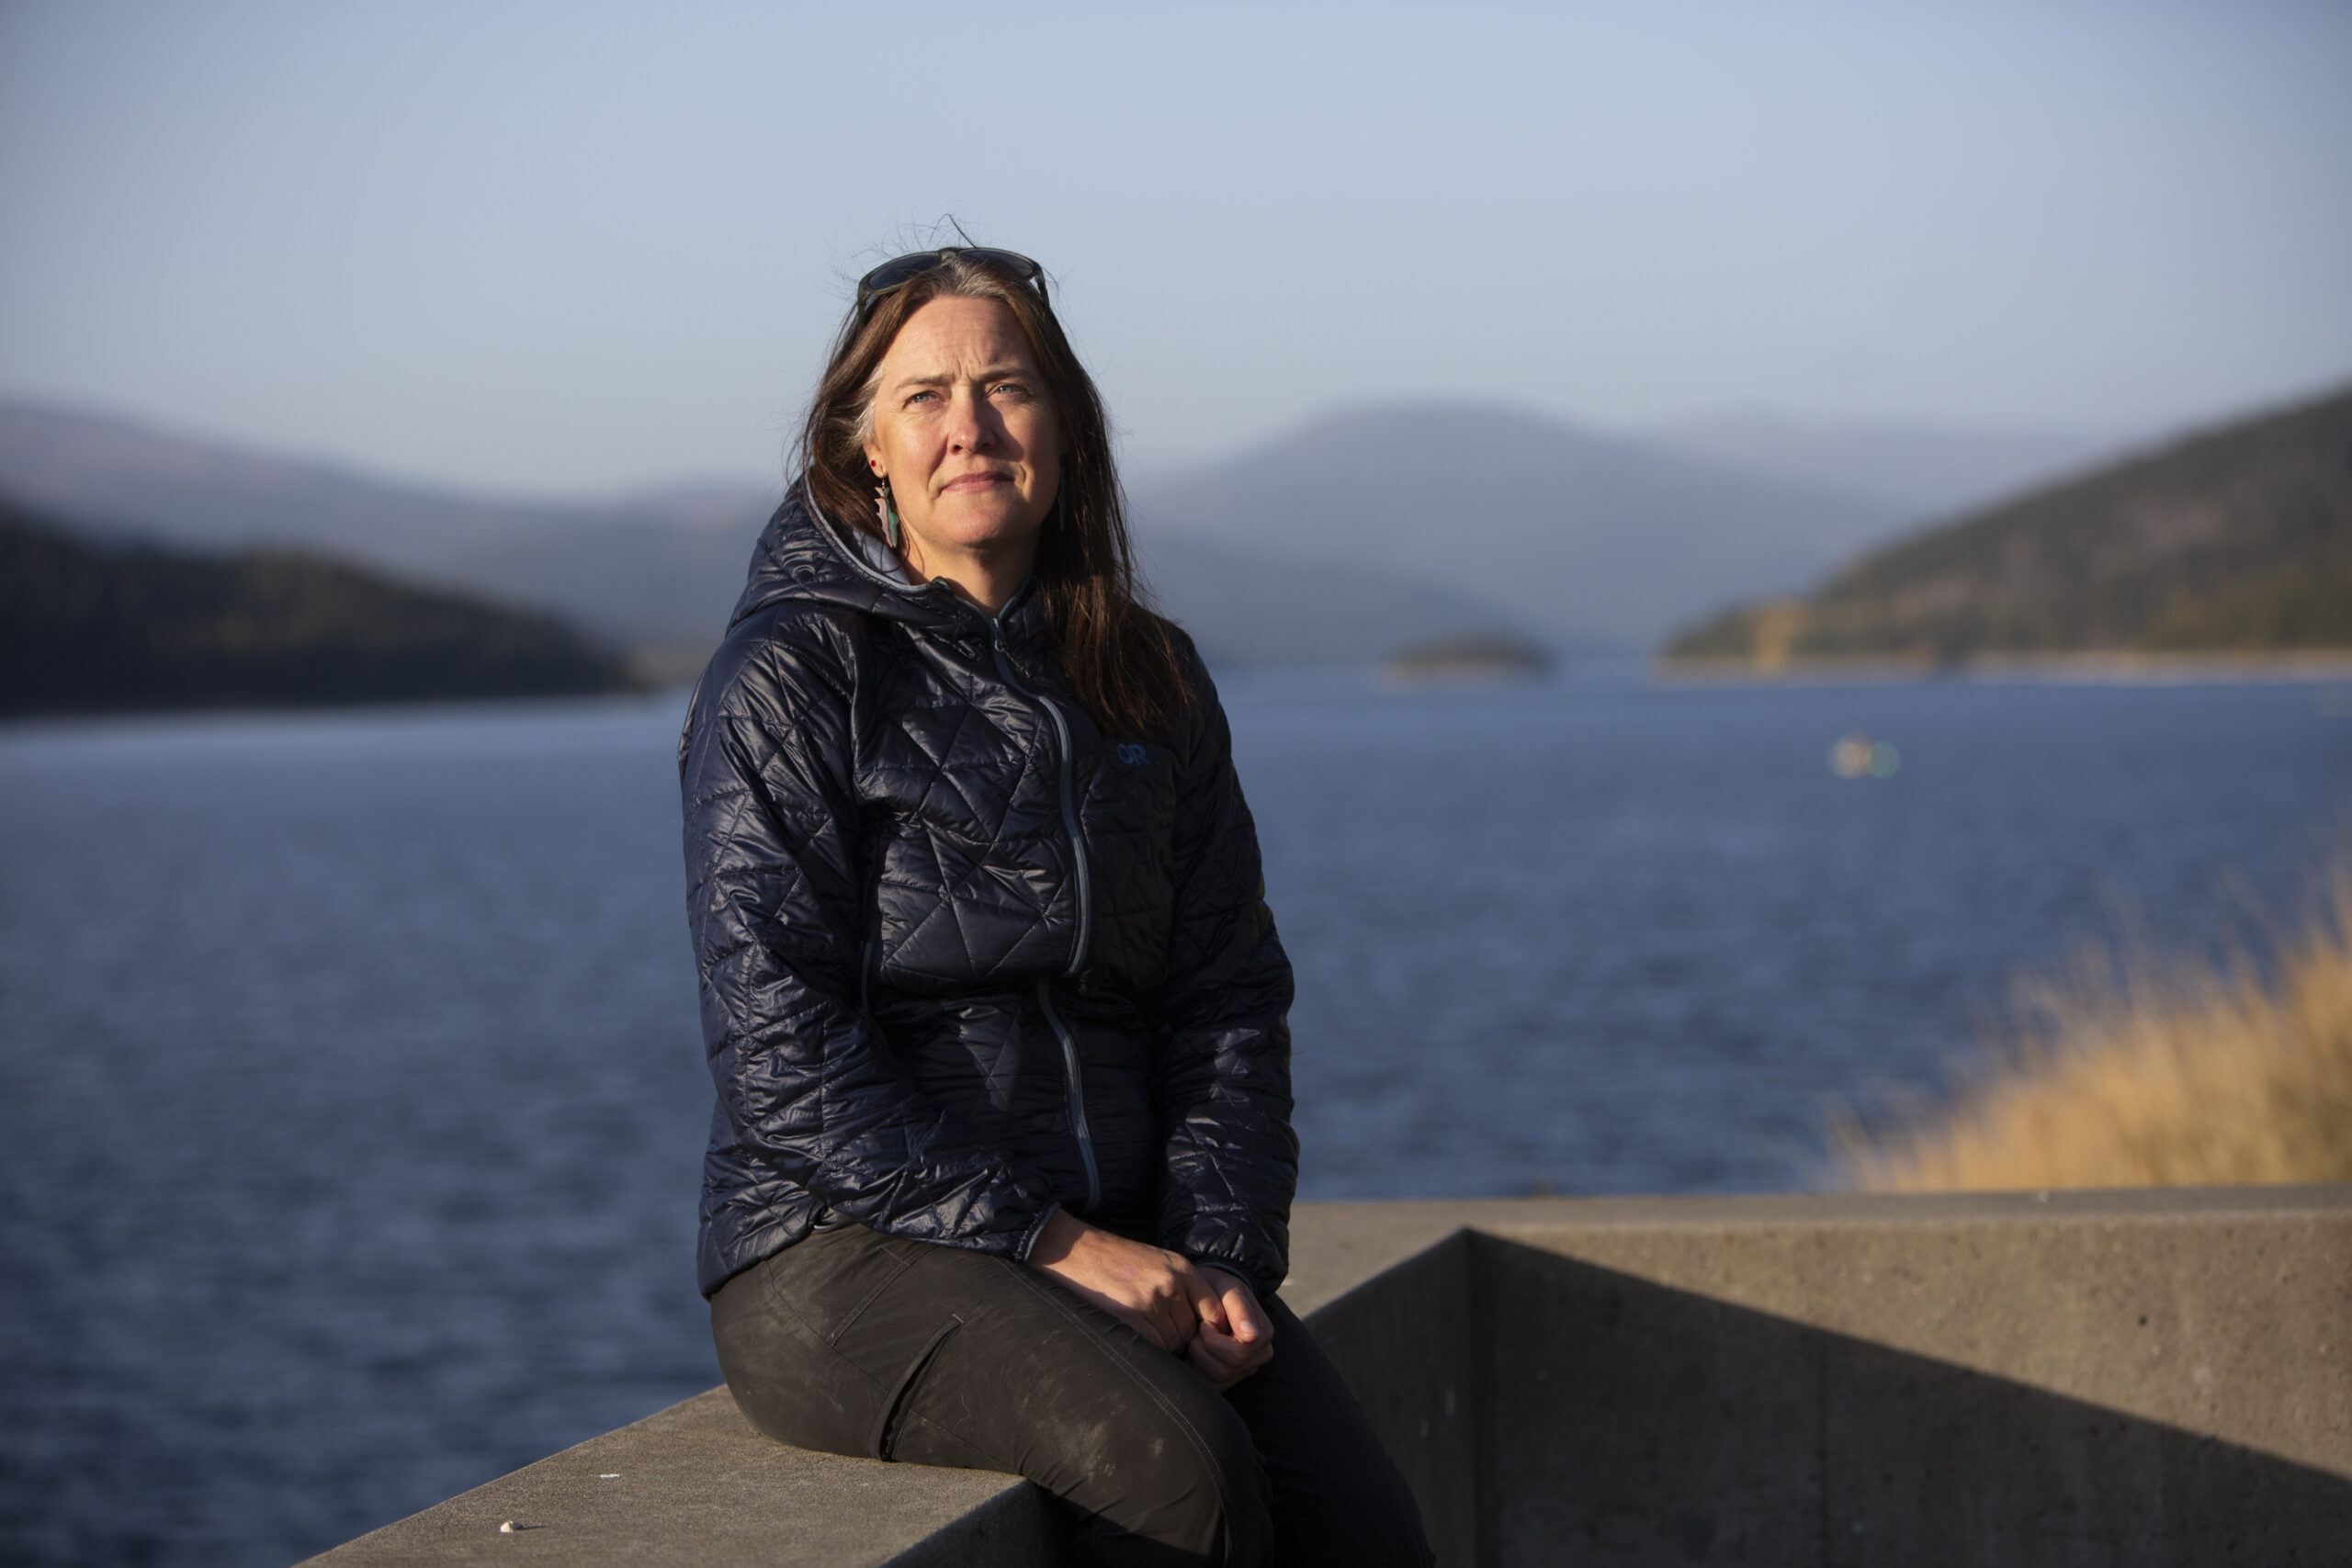 Senior research scientist Erin Sexton, from the Flathead Lake biological research station at the University of Montana poses for a portrait at Lake Koocanusa near the Libby Dam